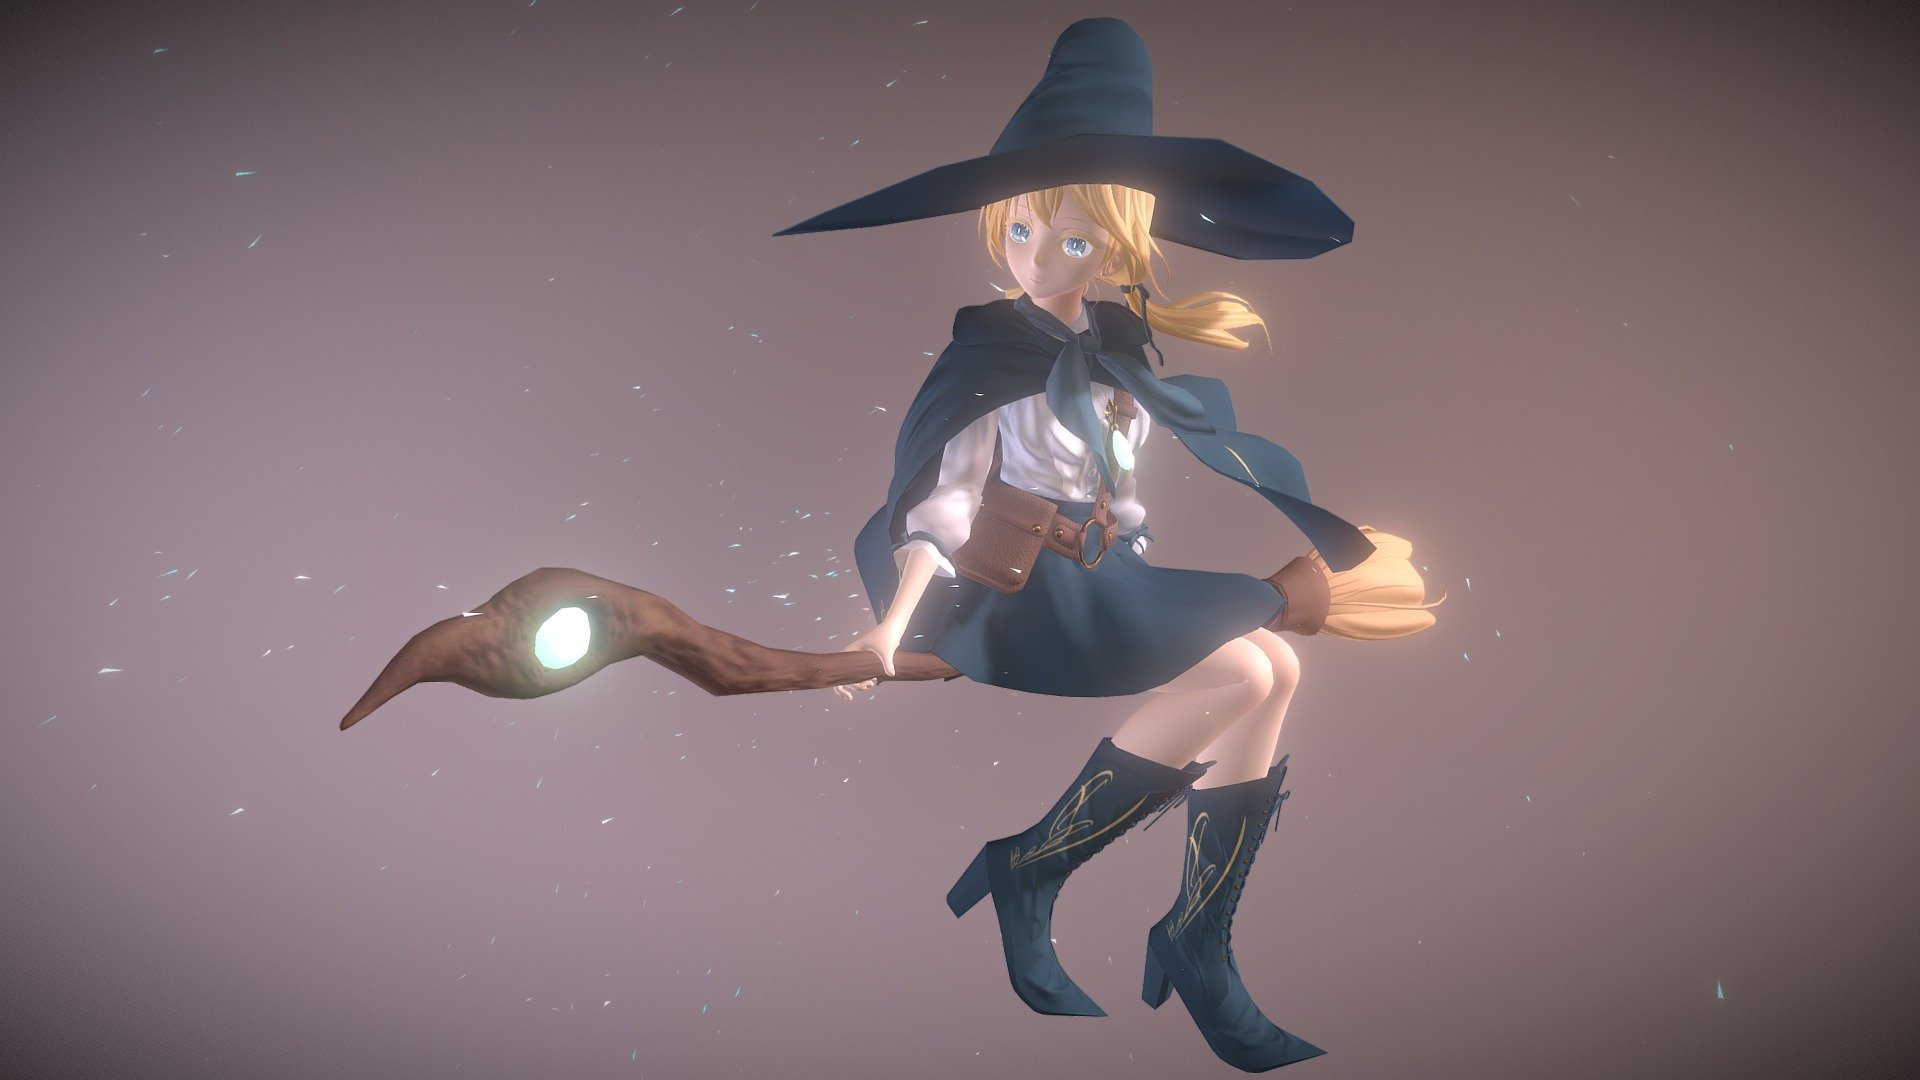 This is the first post!
I made an original magical girl with Blender.
Her name is Charlotte.
She is a cool girl 3d model